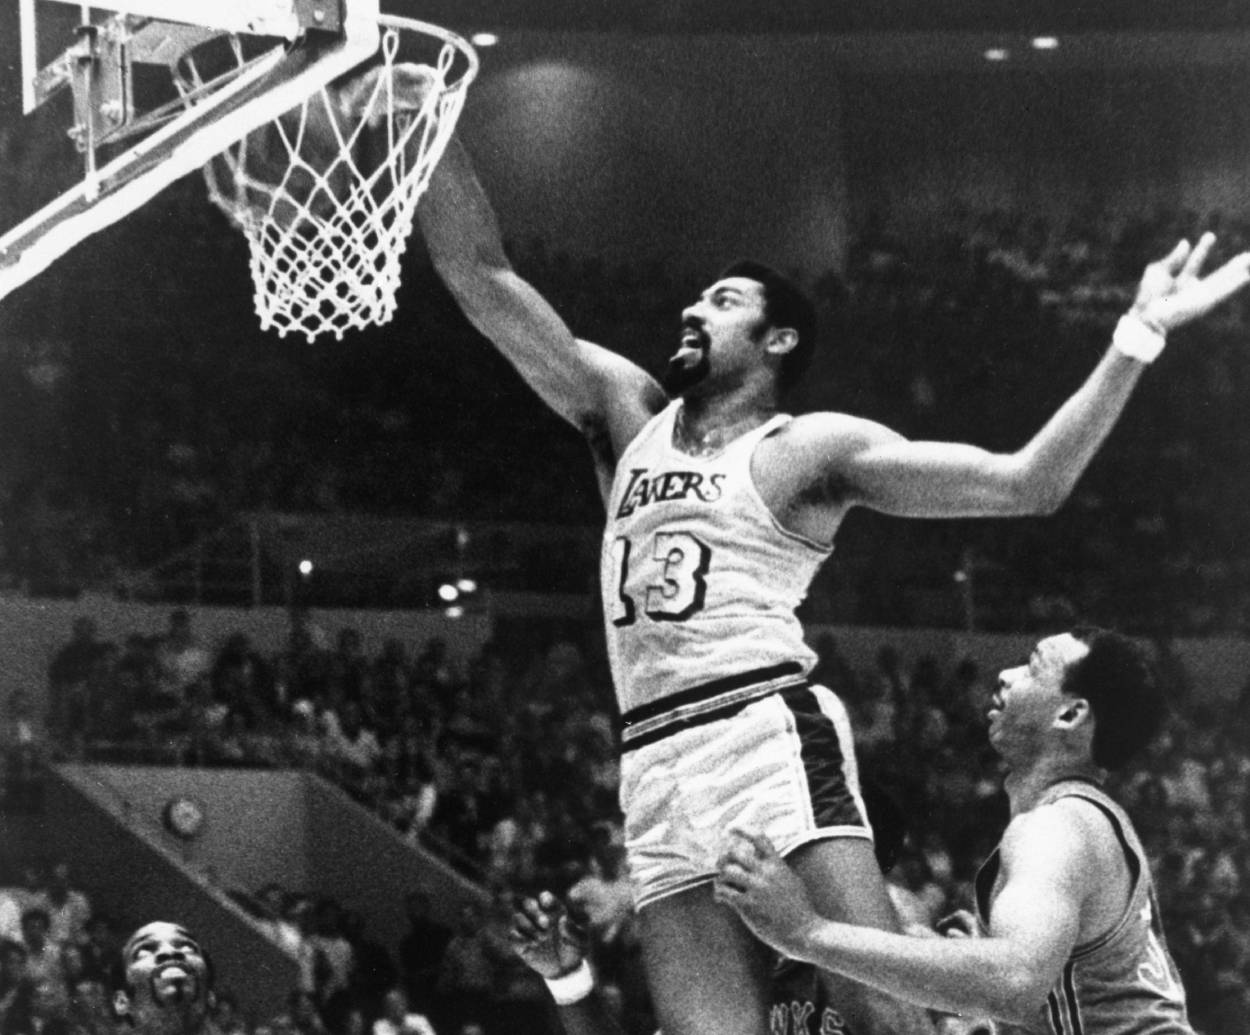 The Los Angeles Lakers center Wilt Chamberlain drives to the basket for a one-handed dunk.